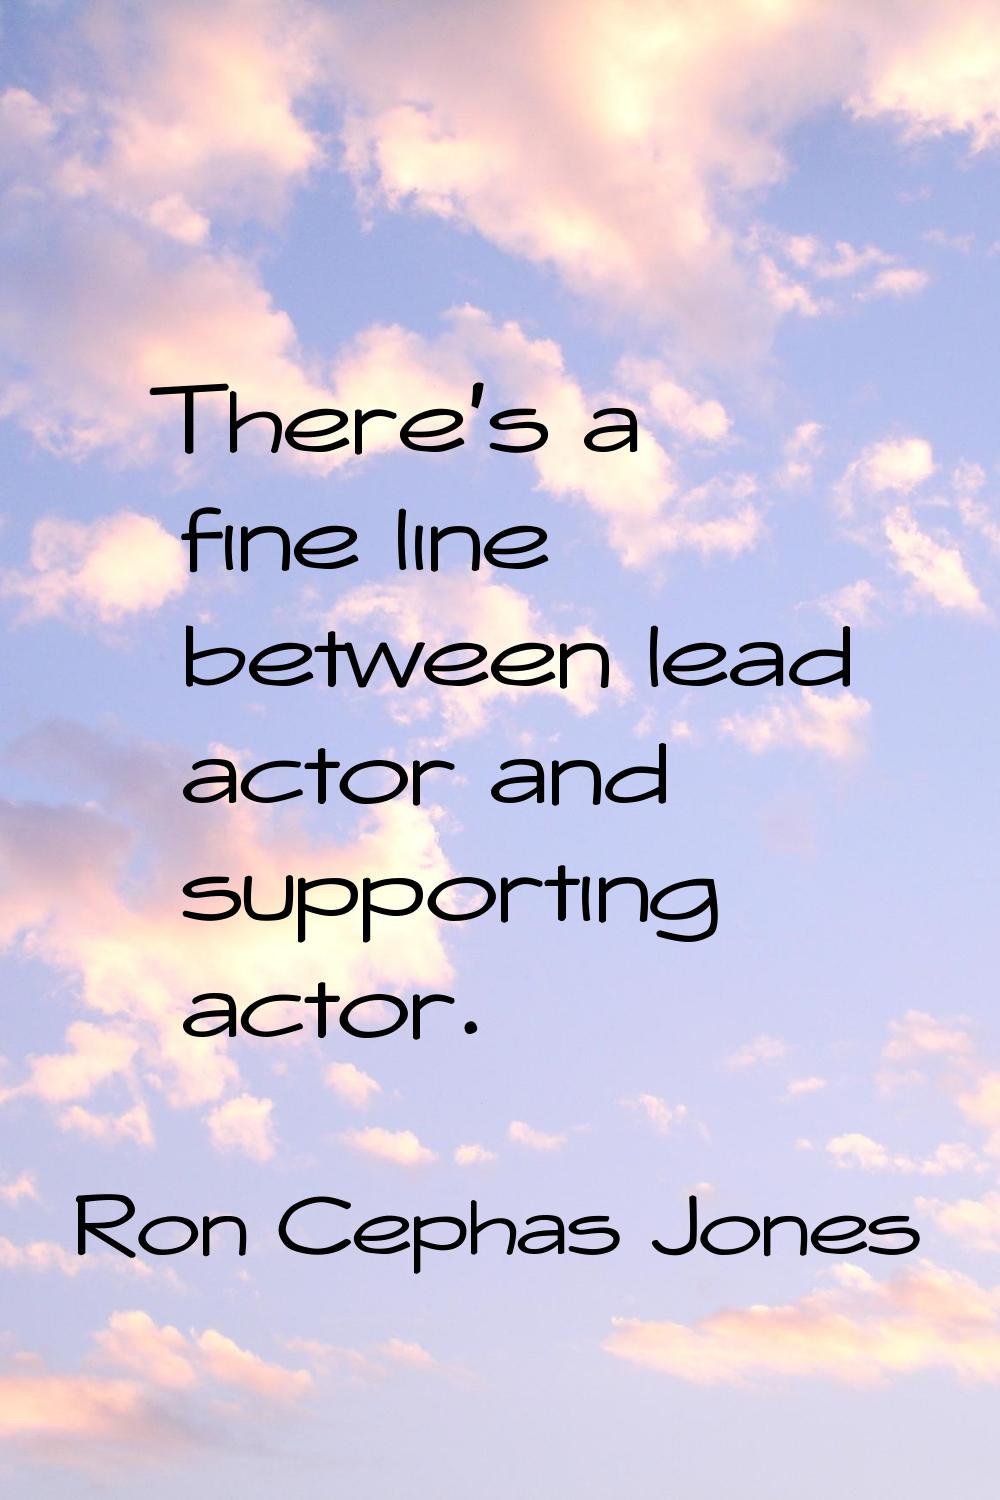 There's a fine line between lead actor and supporting actor.